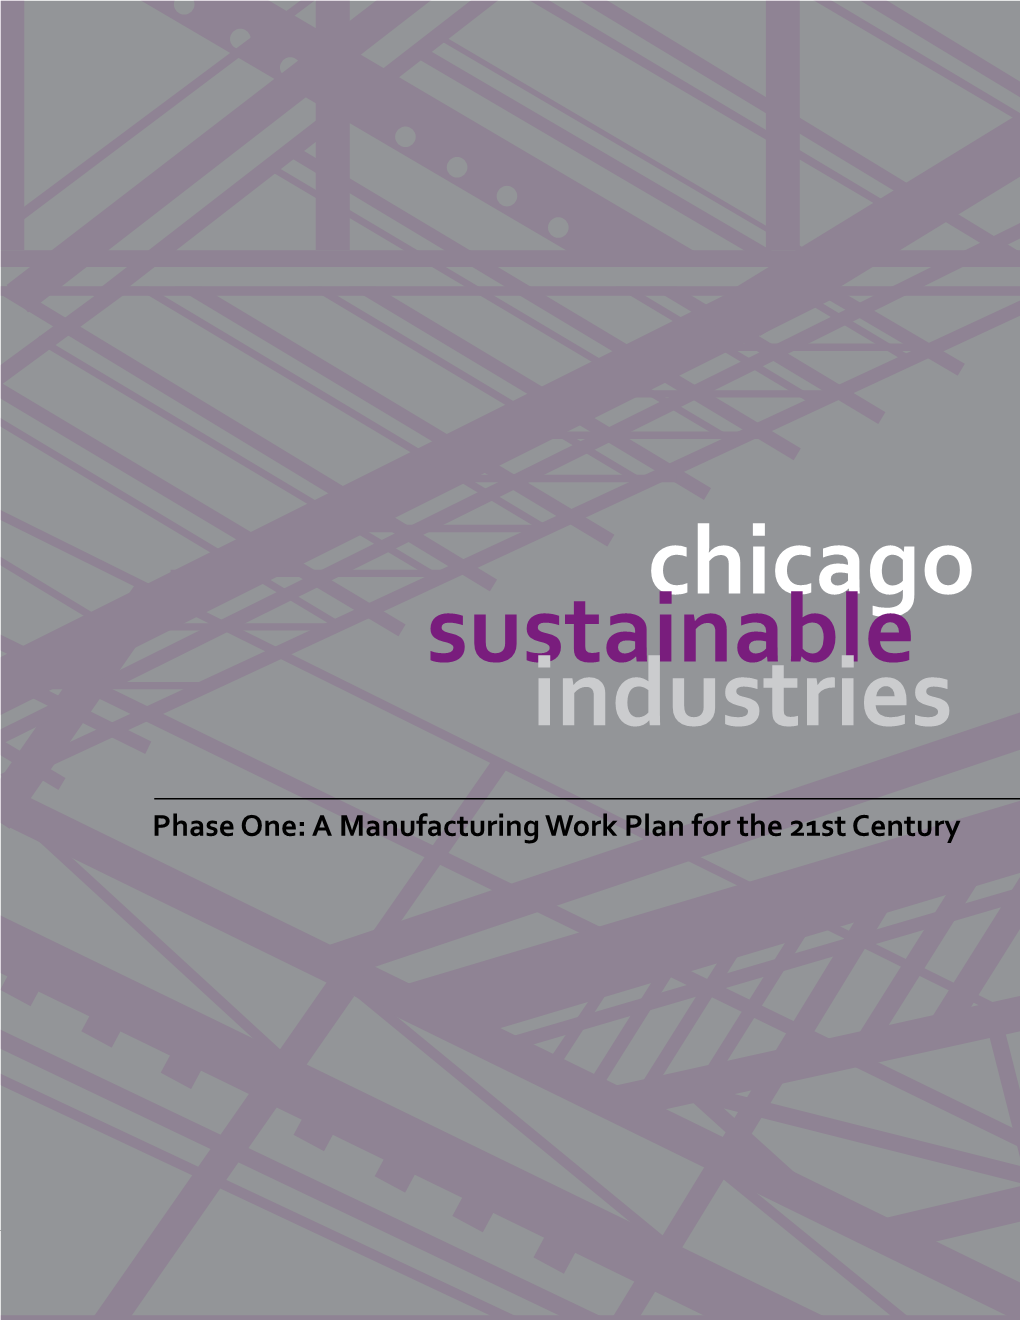 Chicago Sustainable Industries